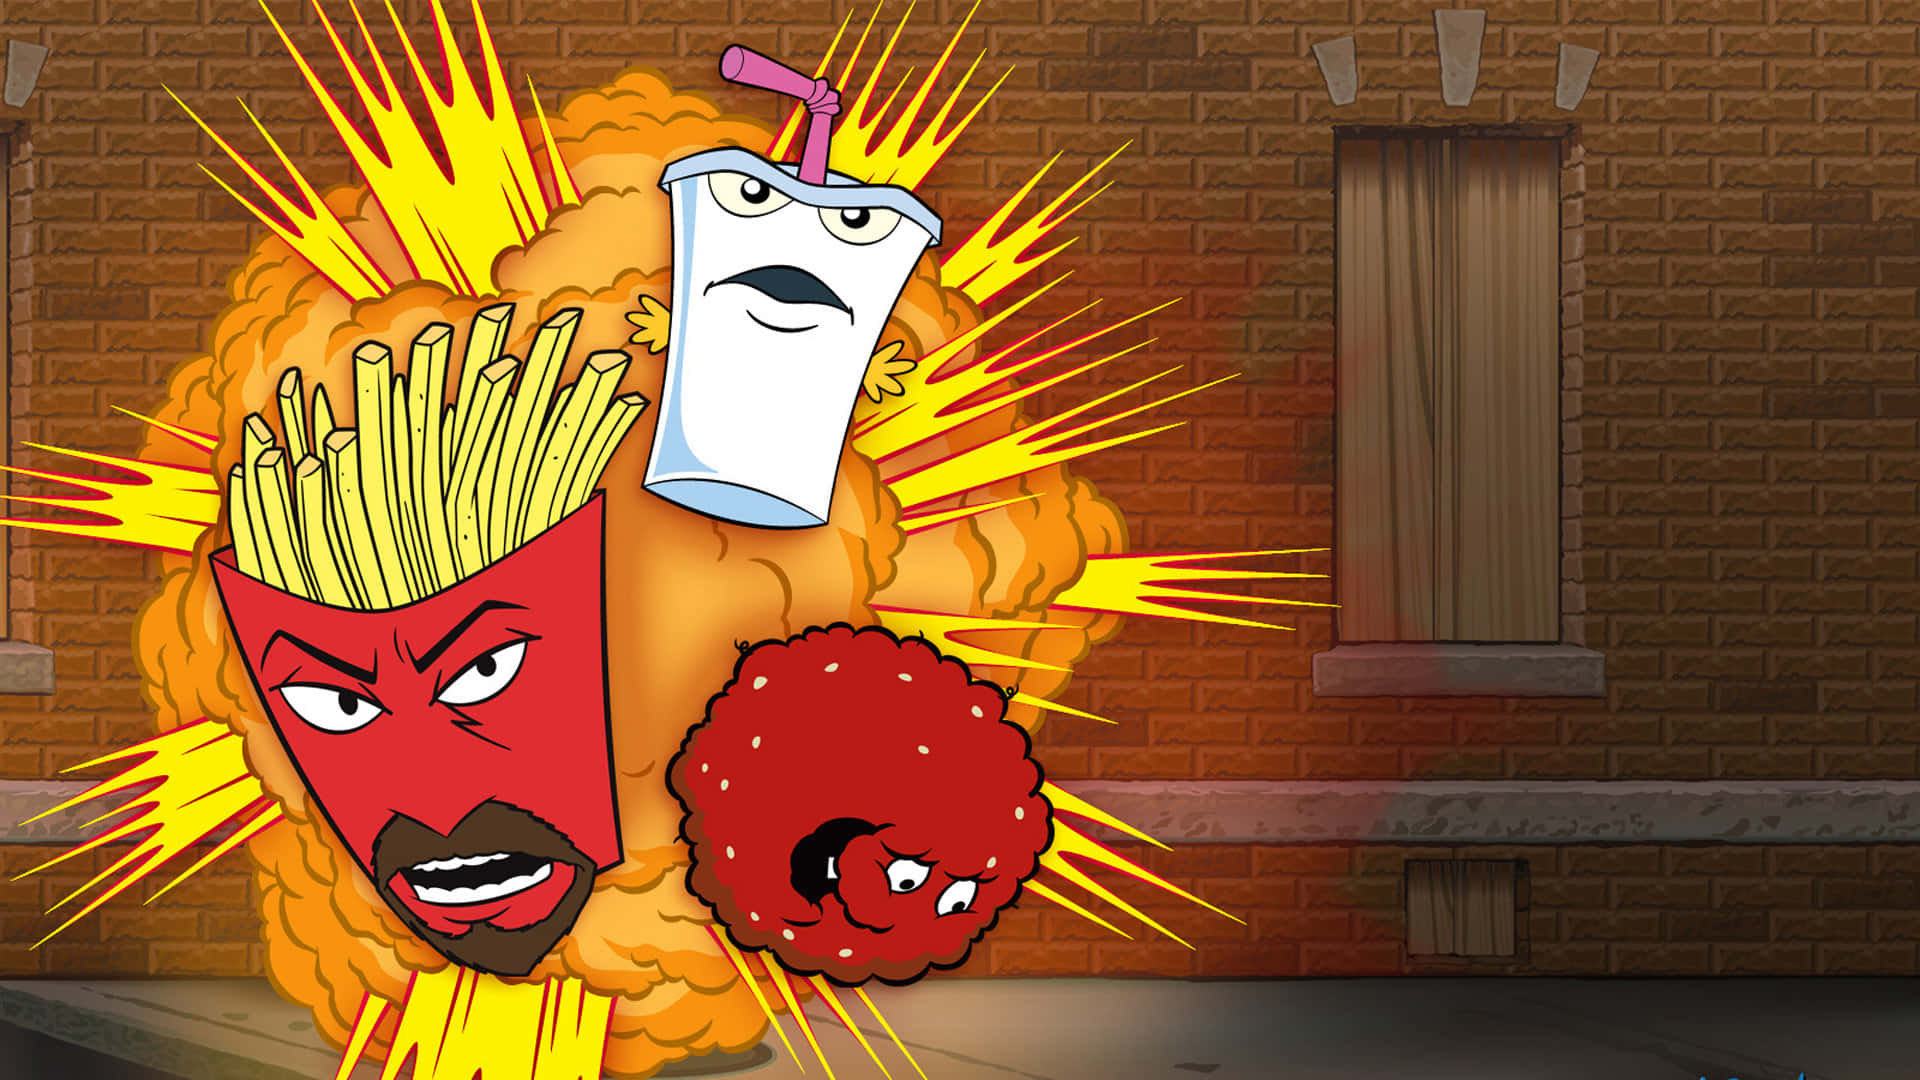 Aqua Teen Hunger Force enjoying a day out together